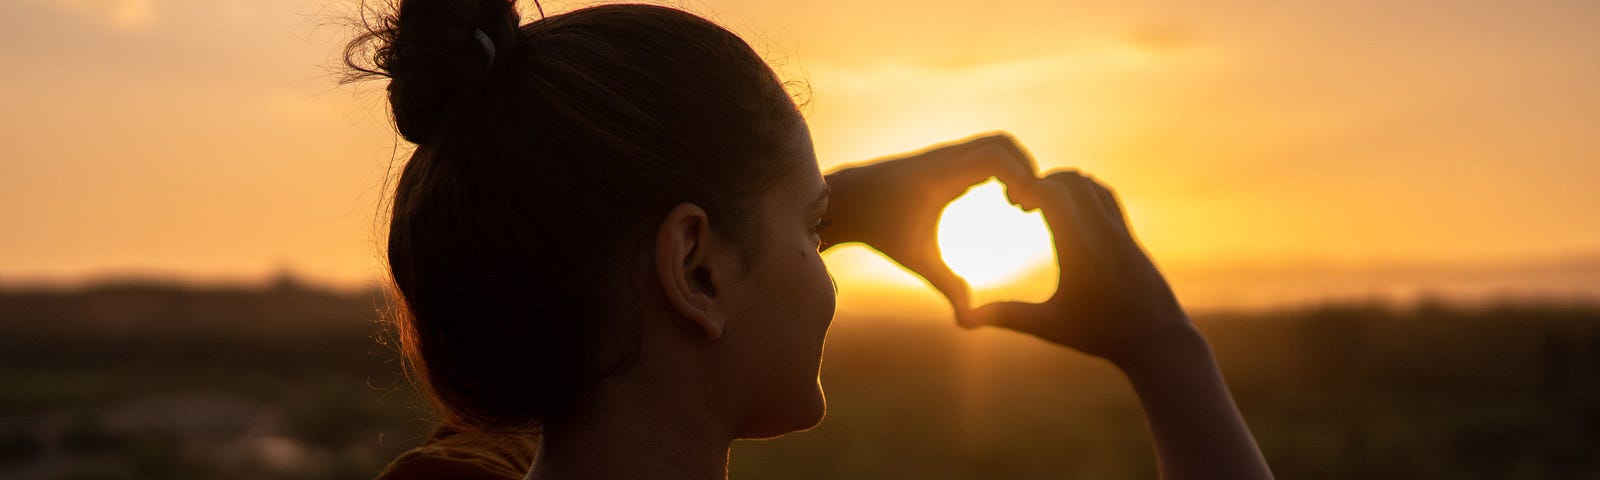 Woman making a heart sign with her hands which captures the setting sun